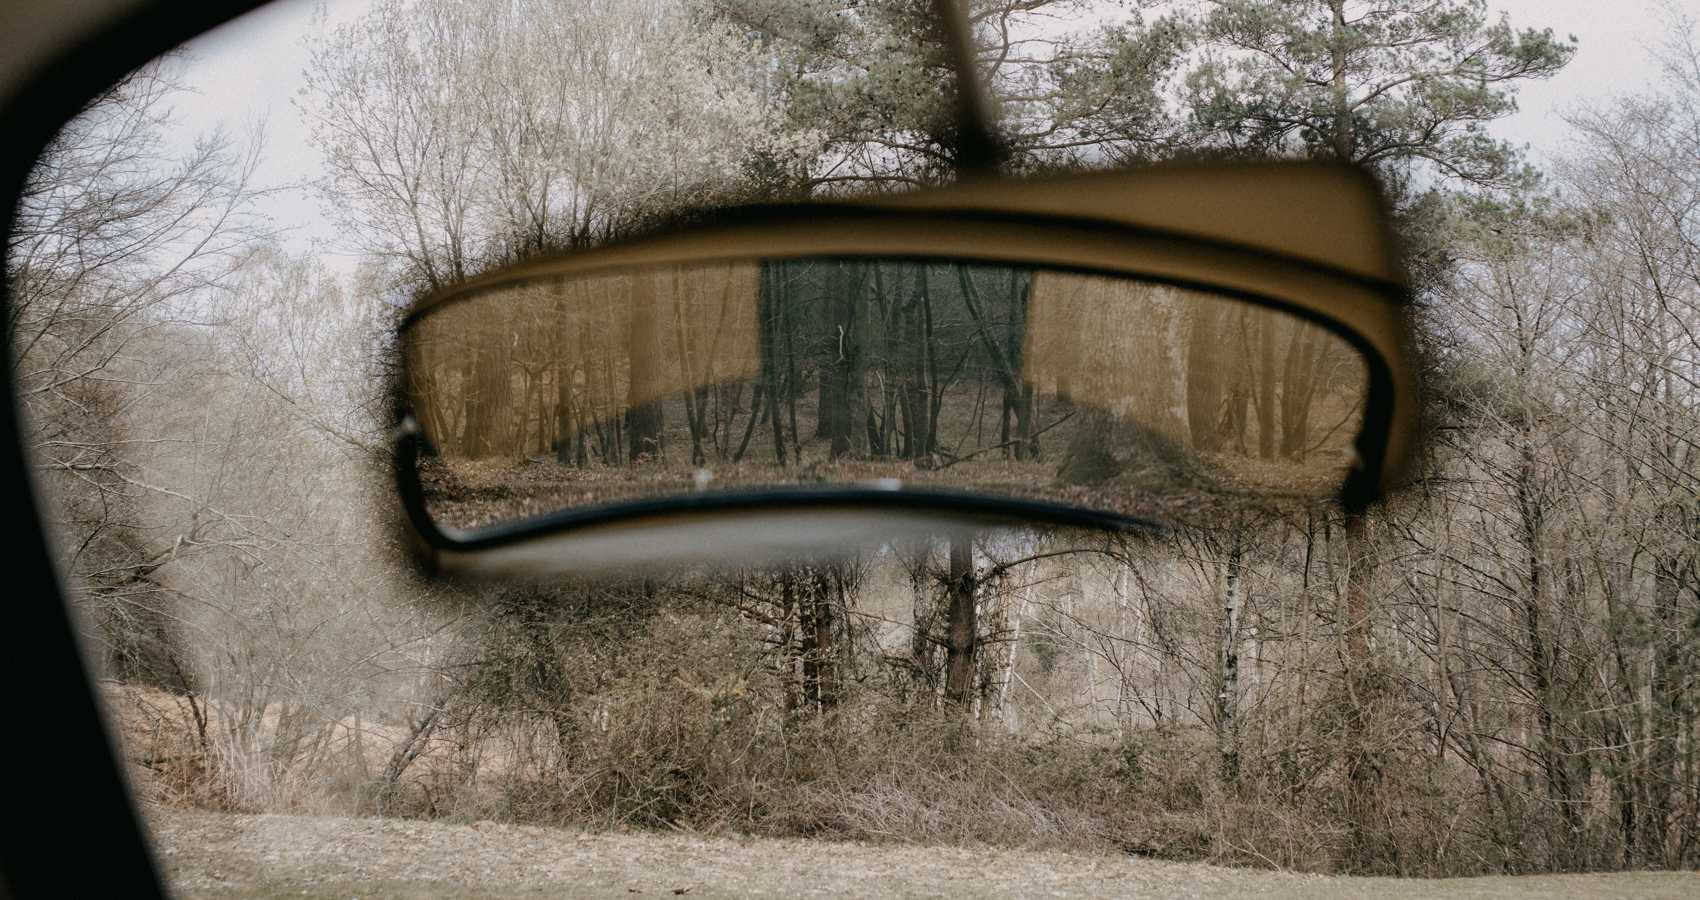 The Rear View Mirror, a poem by Grace Hall at Spillwords.com